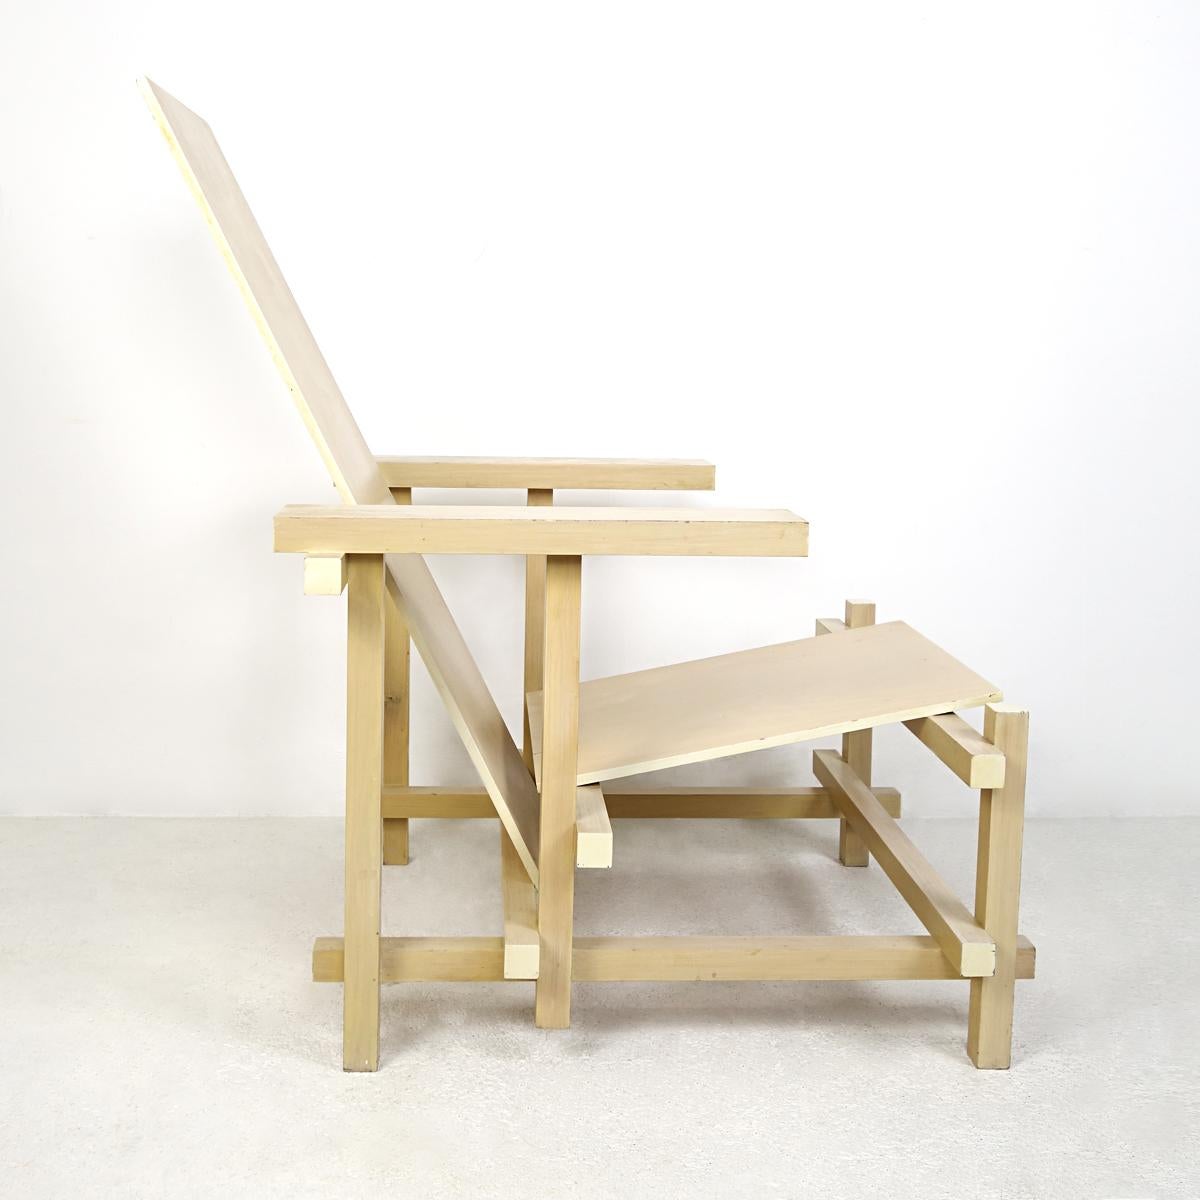 Modernist Chair Made of Uncolored Lacquered Wood after Gerrit Rietveld's Design 2